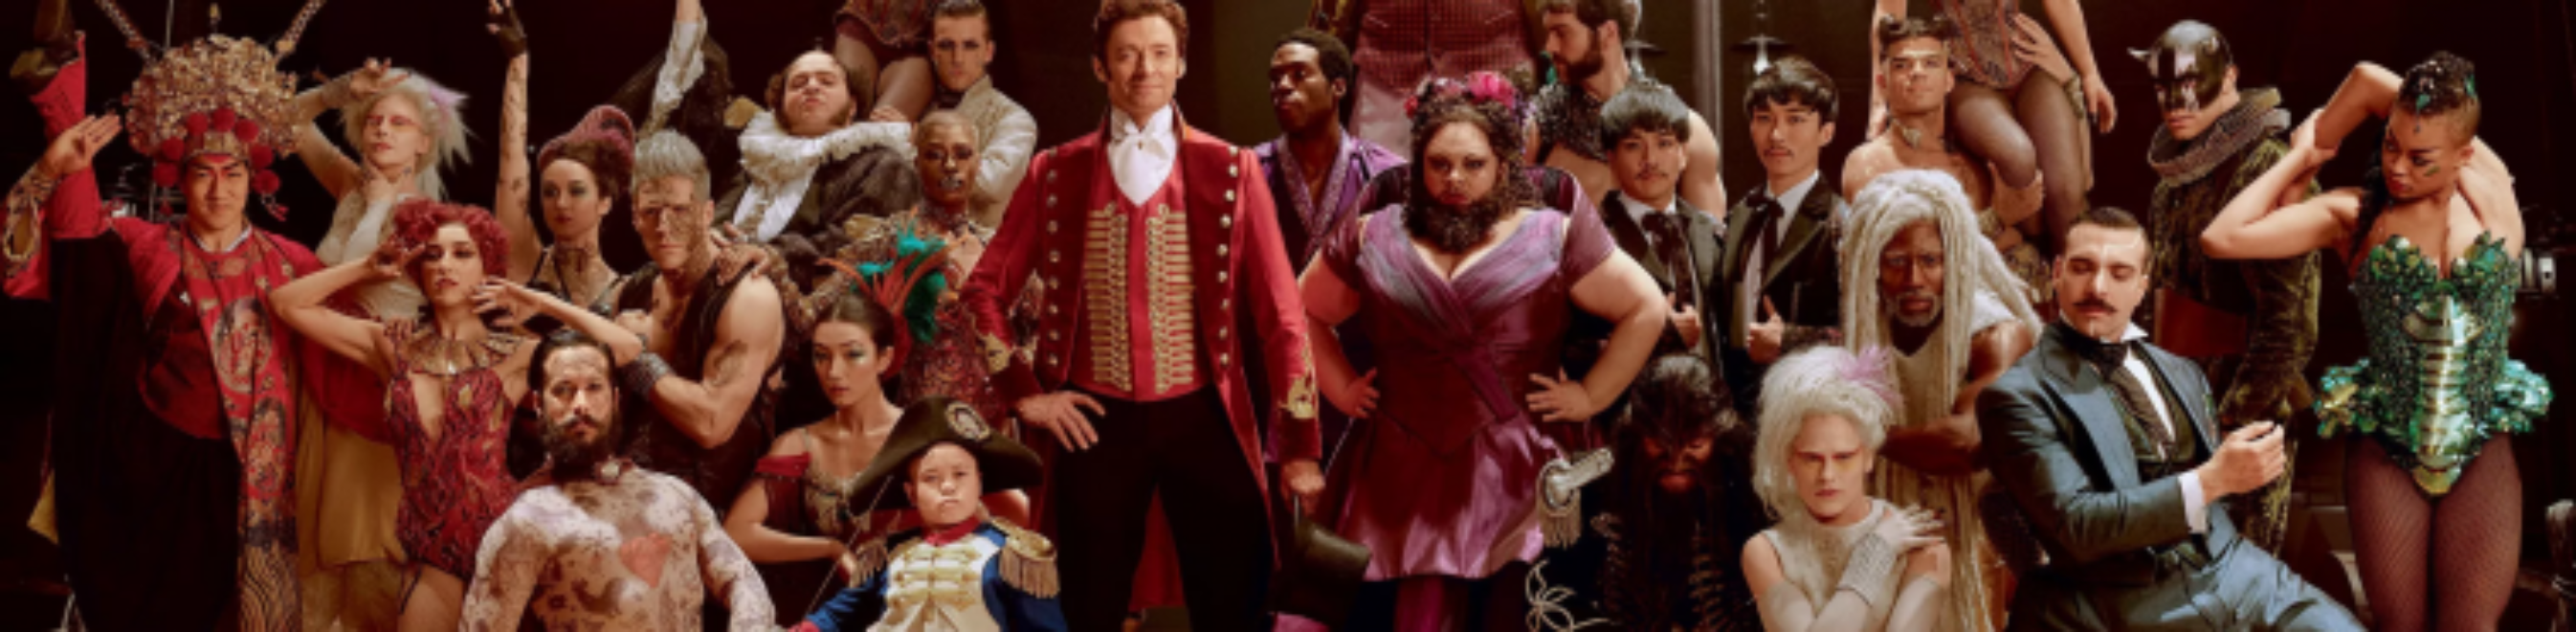 The greatest Showman